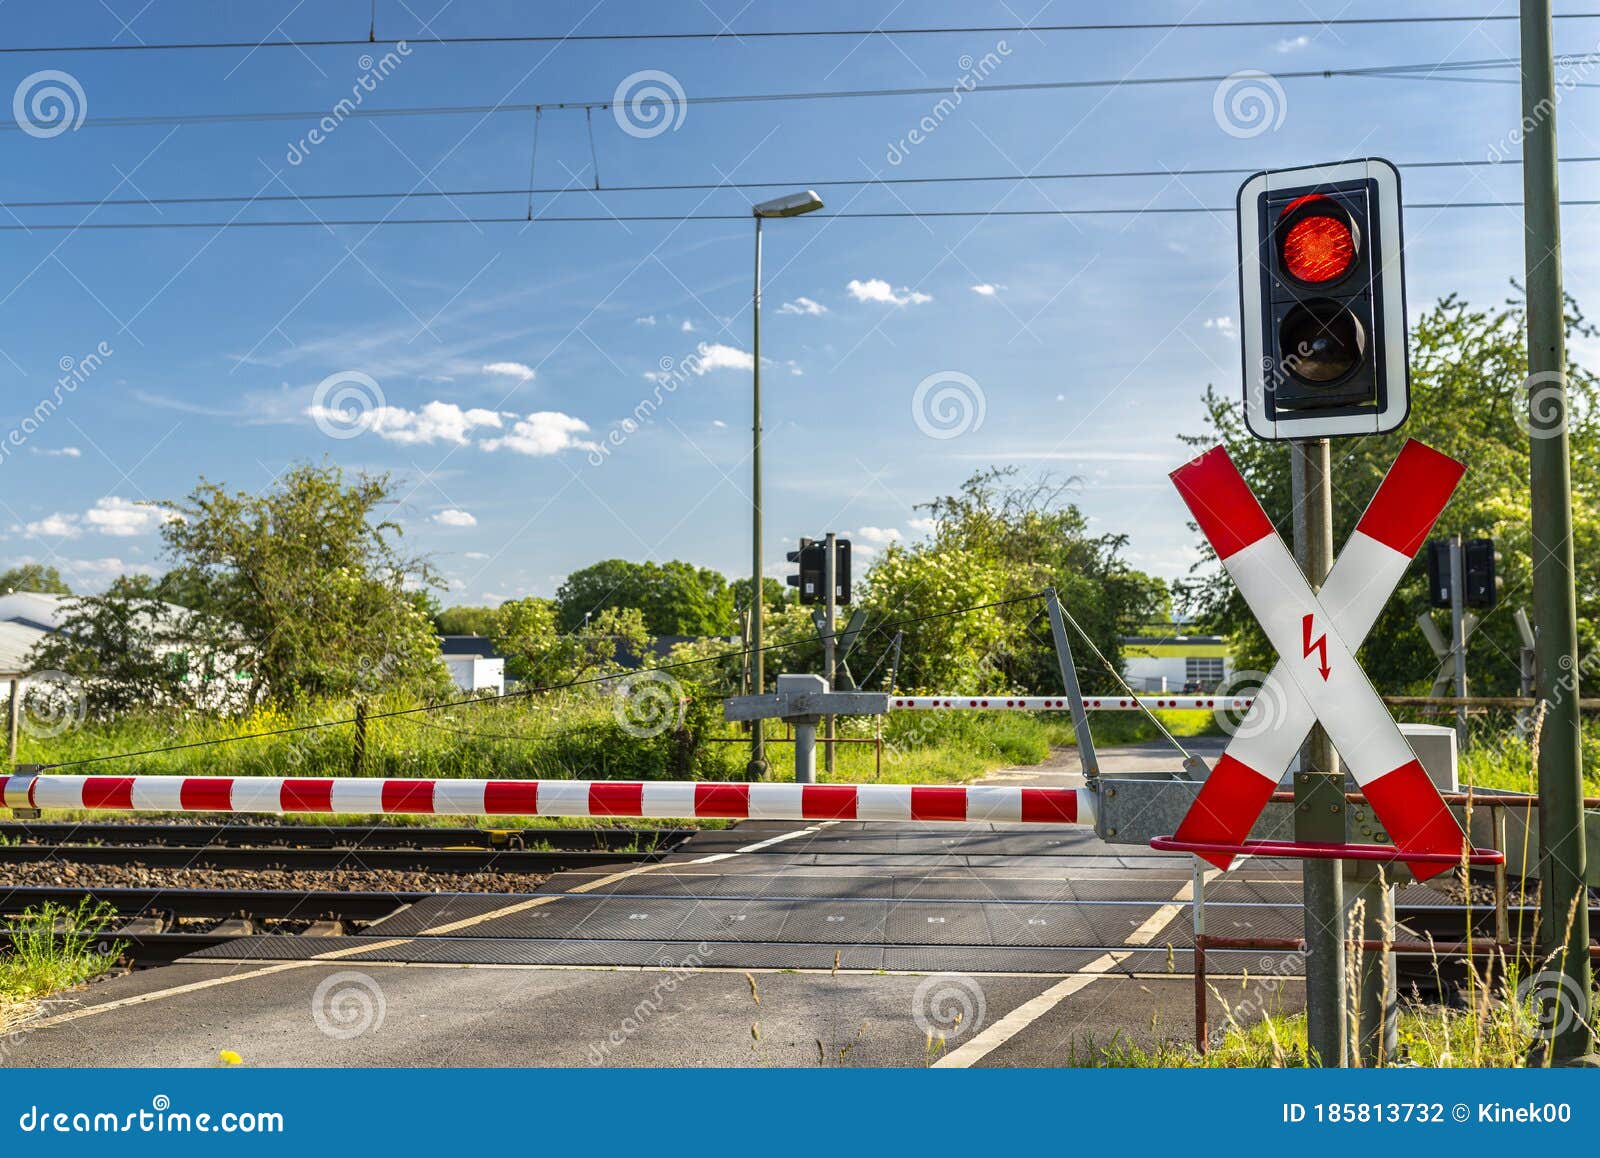 Guarded Railroad Crossing With Closed Barriers Red Warning Light And Cross Of Saint Andrew Stock Photo Image Of Hazard Caution